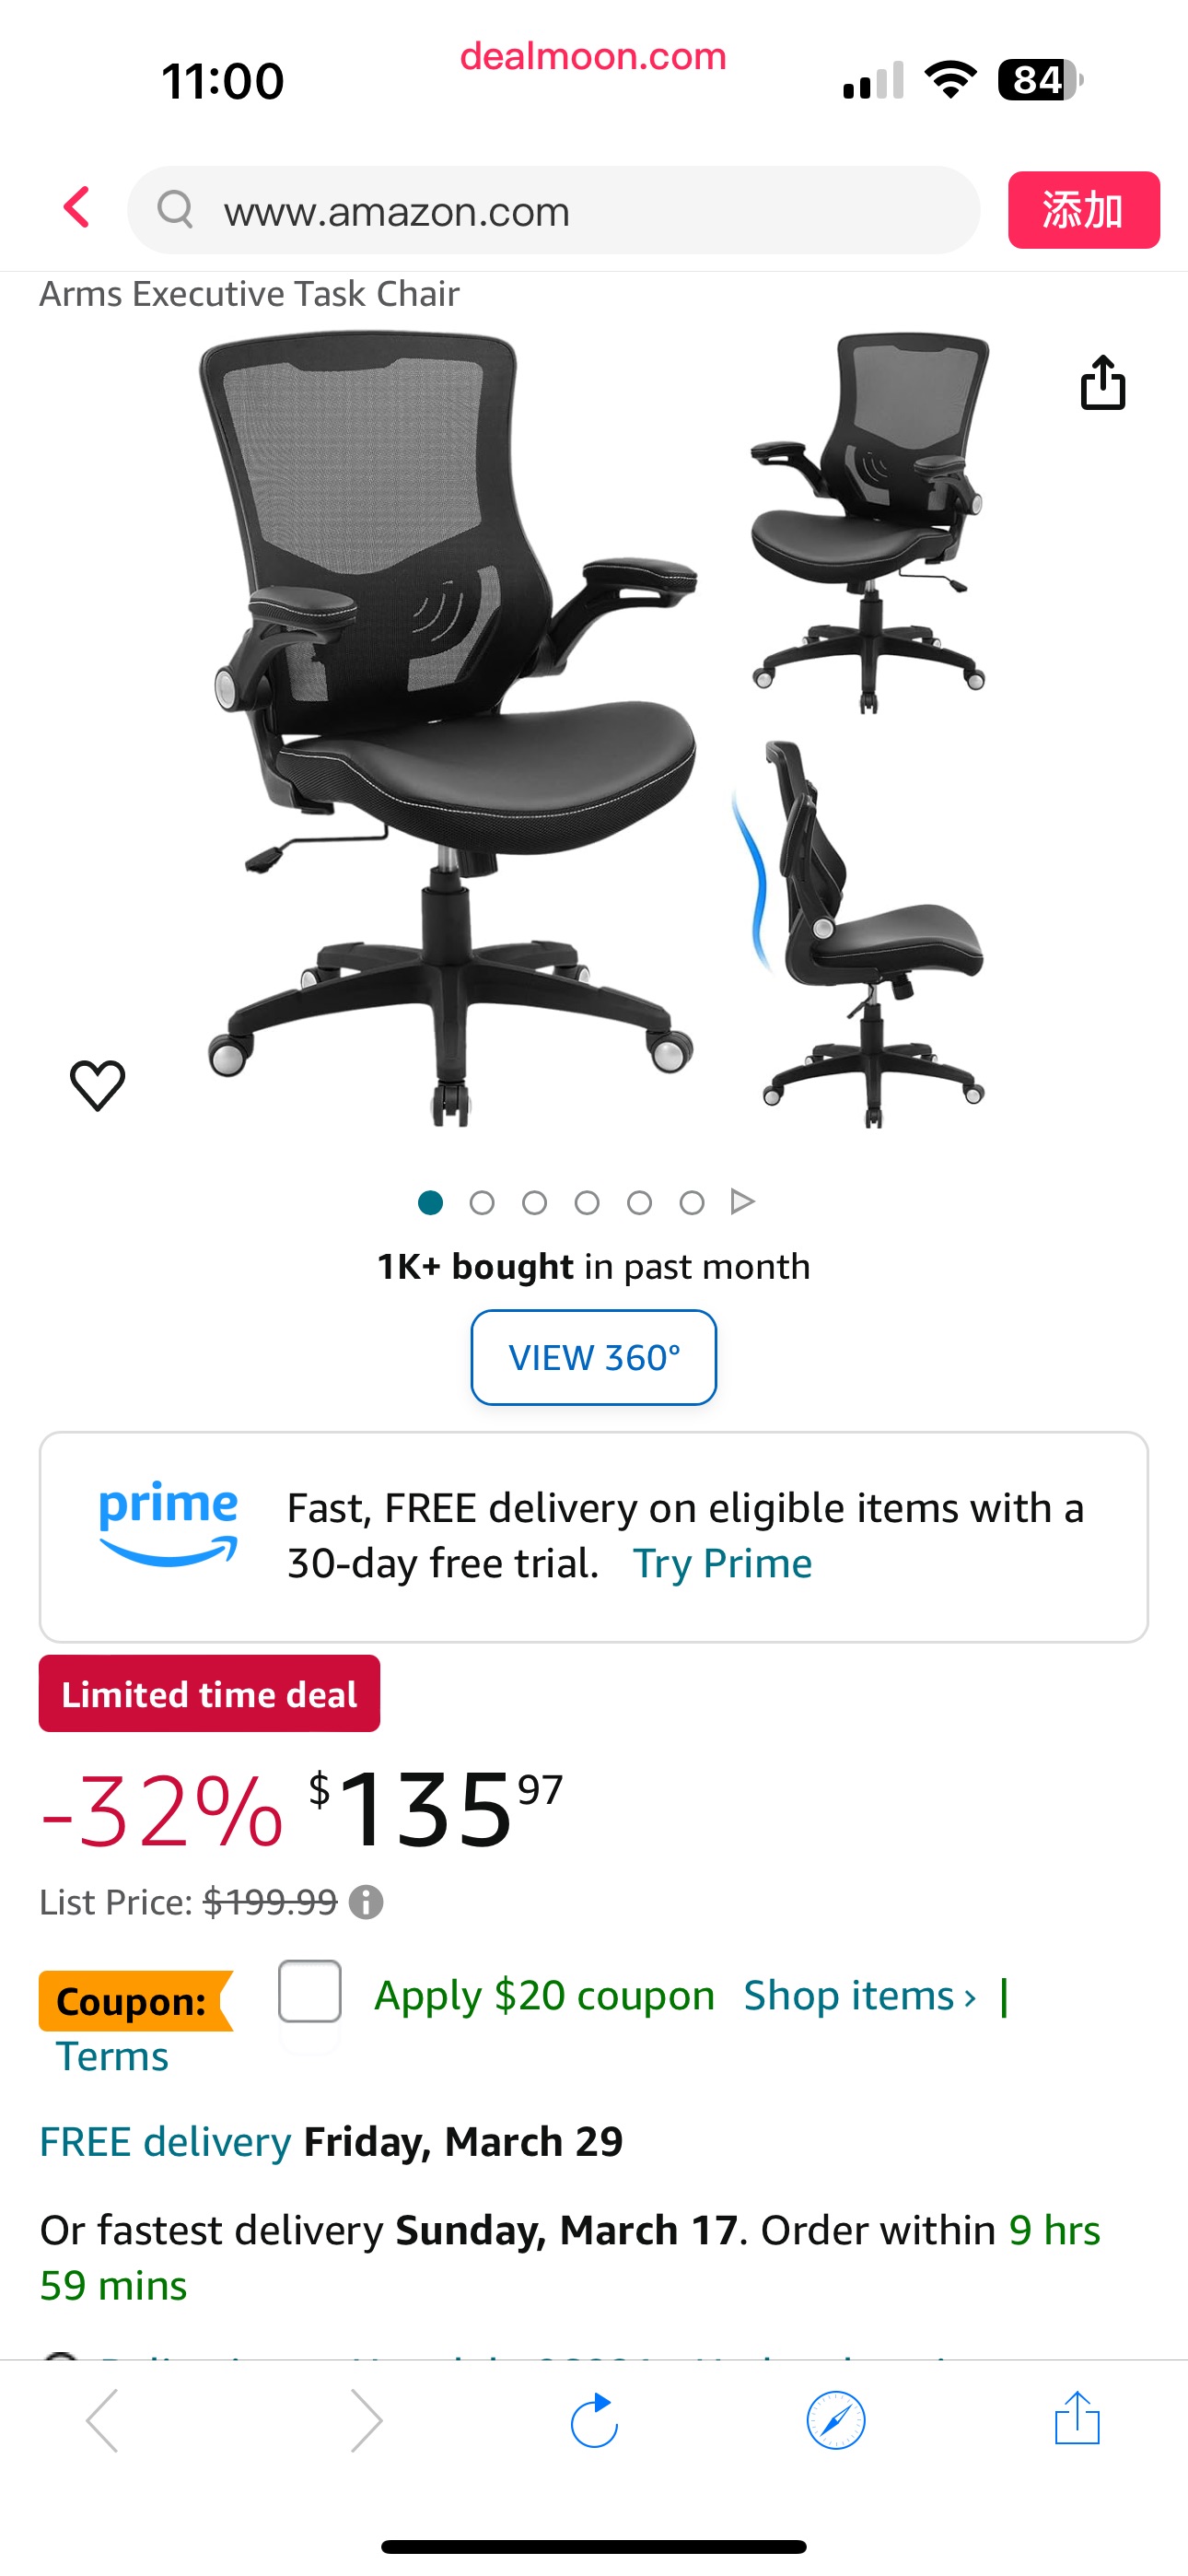 Amazon.com: Office Chair Ergonomic Desk Chair, Computer PU Leather Home Office Chair, Swivel Mesh Back Adjustable Lumbar Support Flip-up Arms Executive Task Chair : Home & Kitchen人造革办公椅